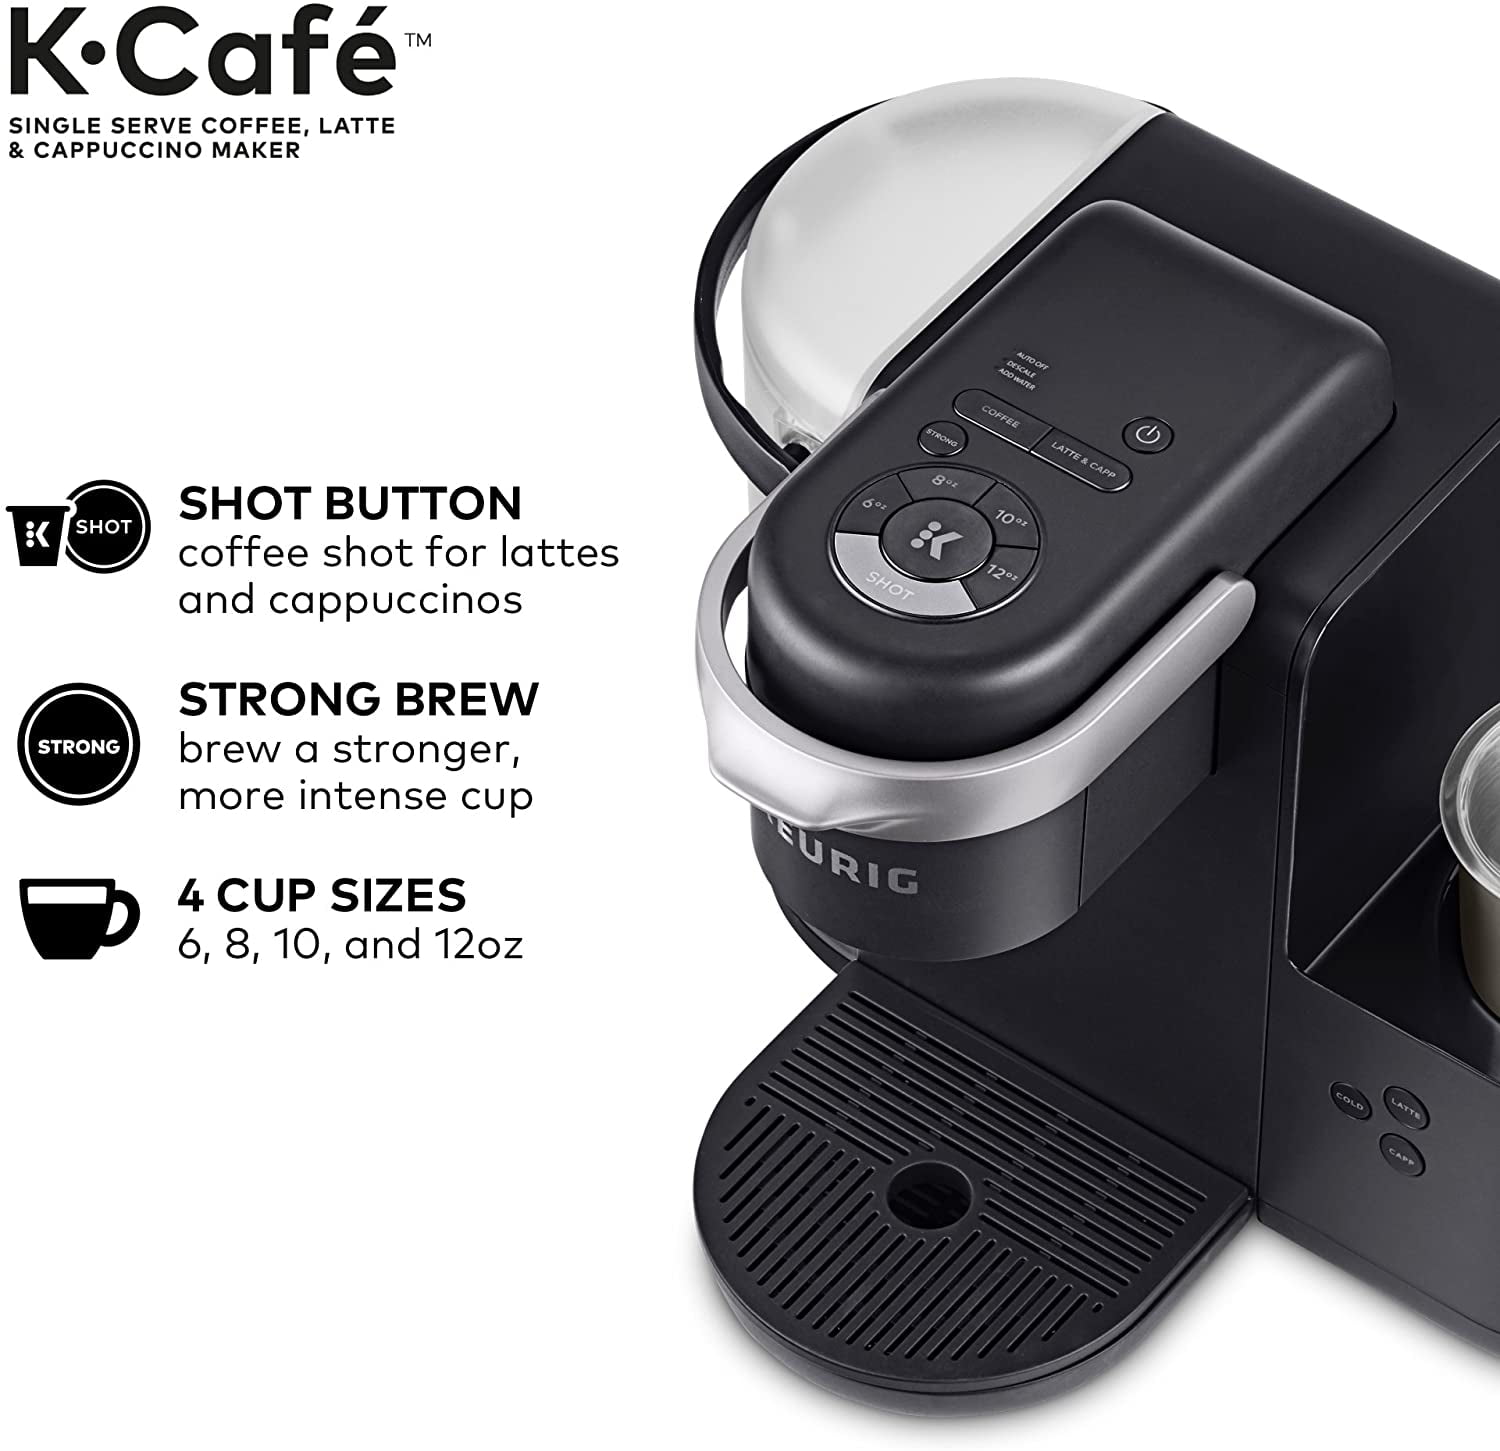 The Frothing issue on Keurig® K-Cafe® Single-Serve K-Cup Pod® Coffee, Latte  & Cappuccino Maker : r/keurig